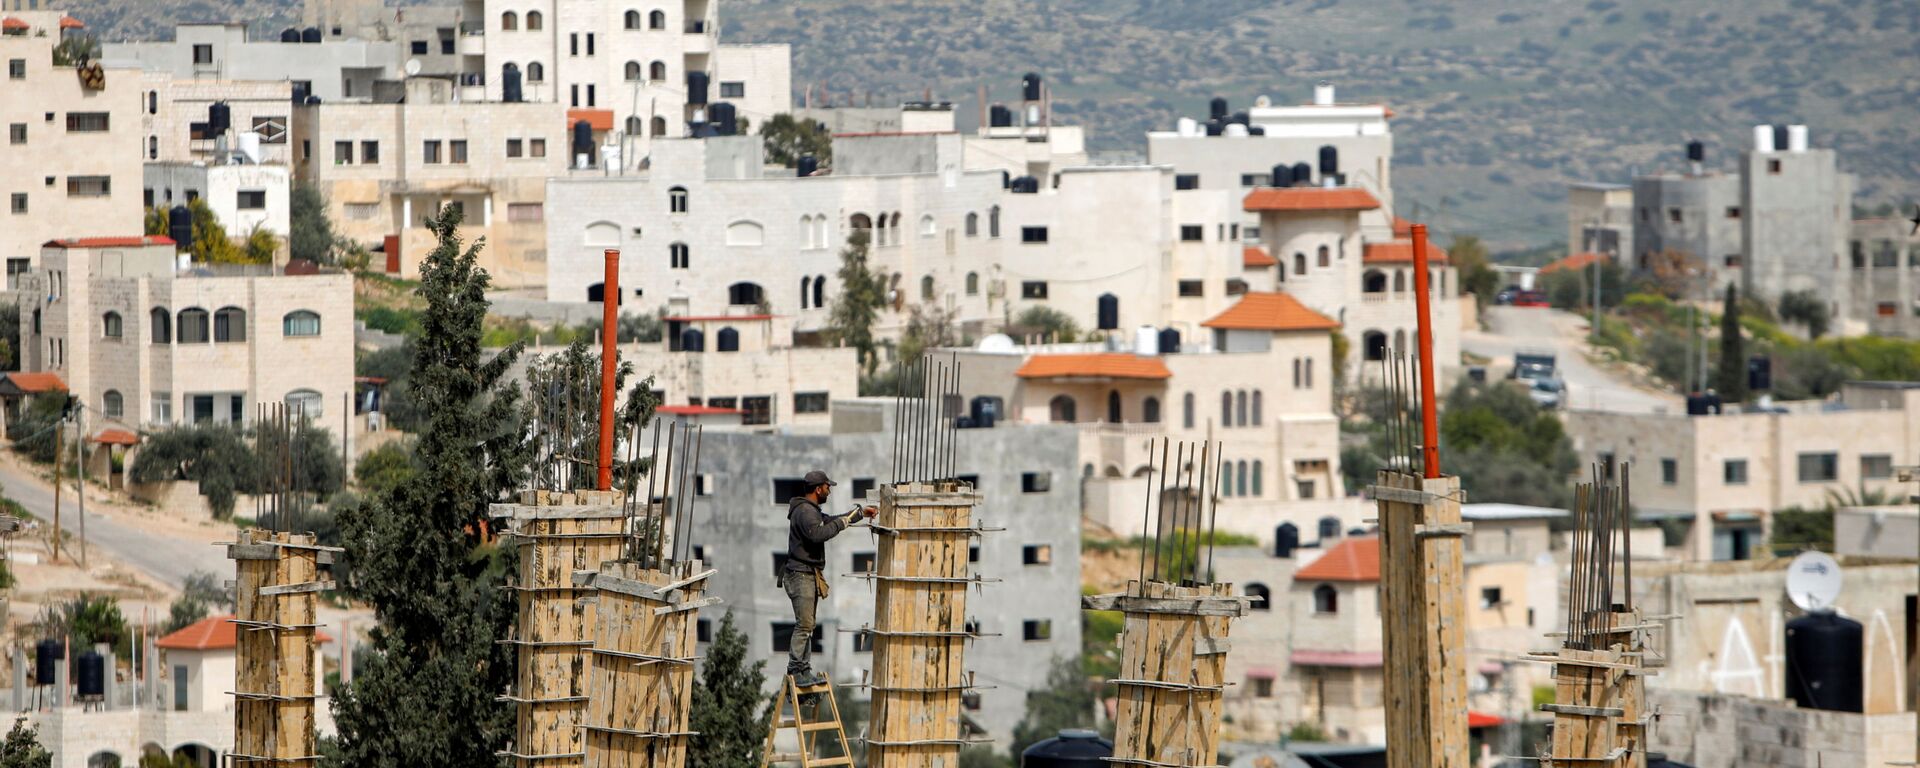 A Palestinian labourer works at the construction site of a house during a lockdown imposed to prevent the spread of the coronavirus disease (COVID-19), in Tubas in the Israeli-occupied West Bank, 15 March 2021 - Sputnik International, 1920, 22.03.2021